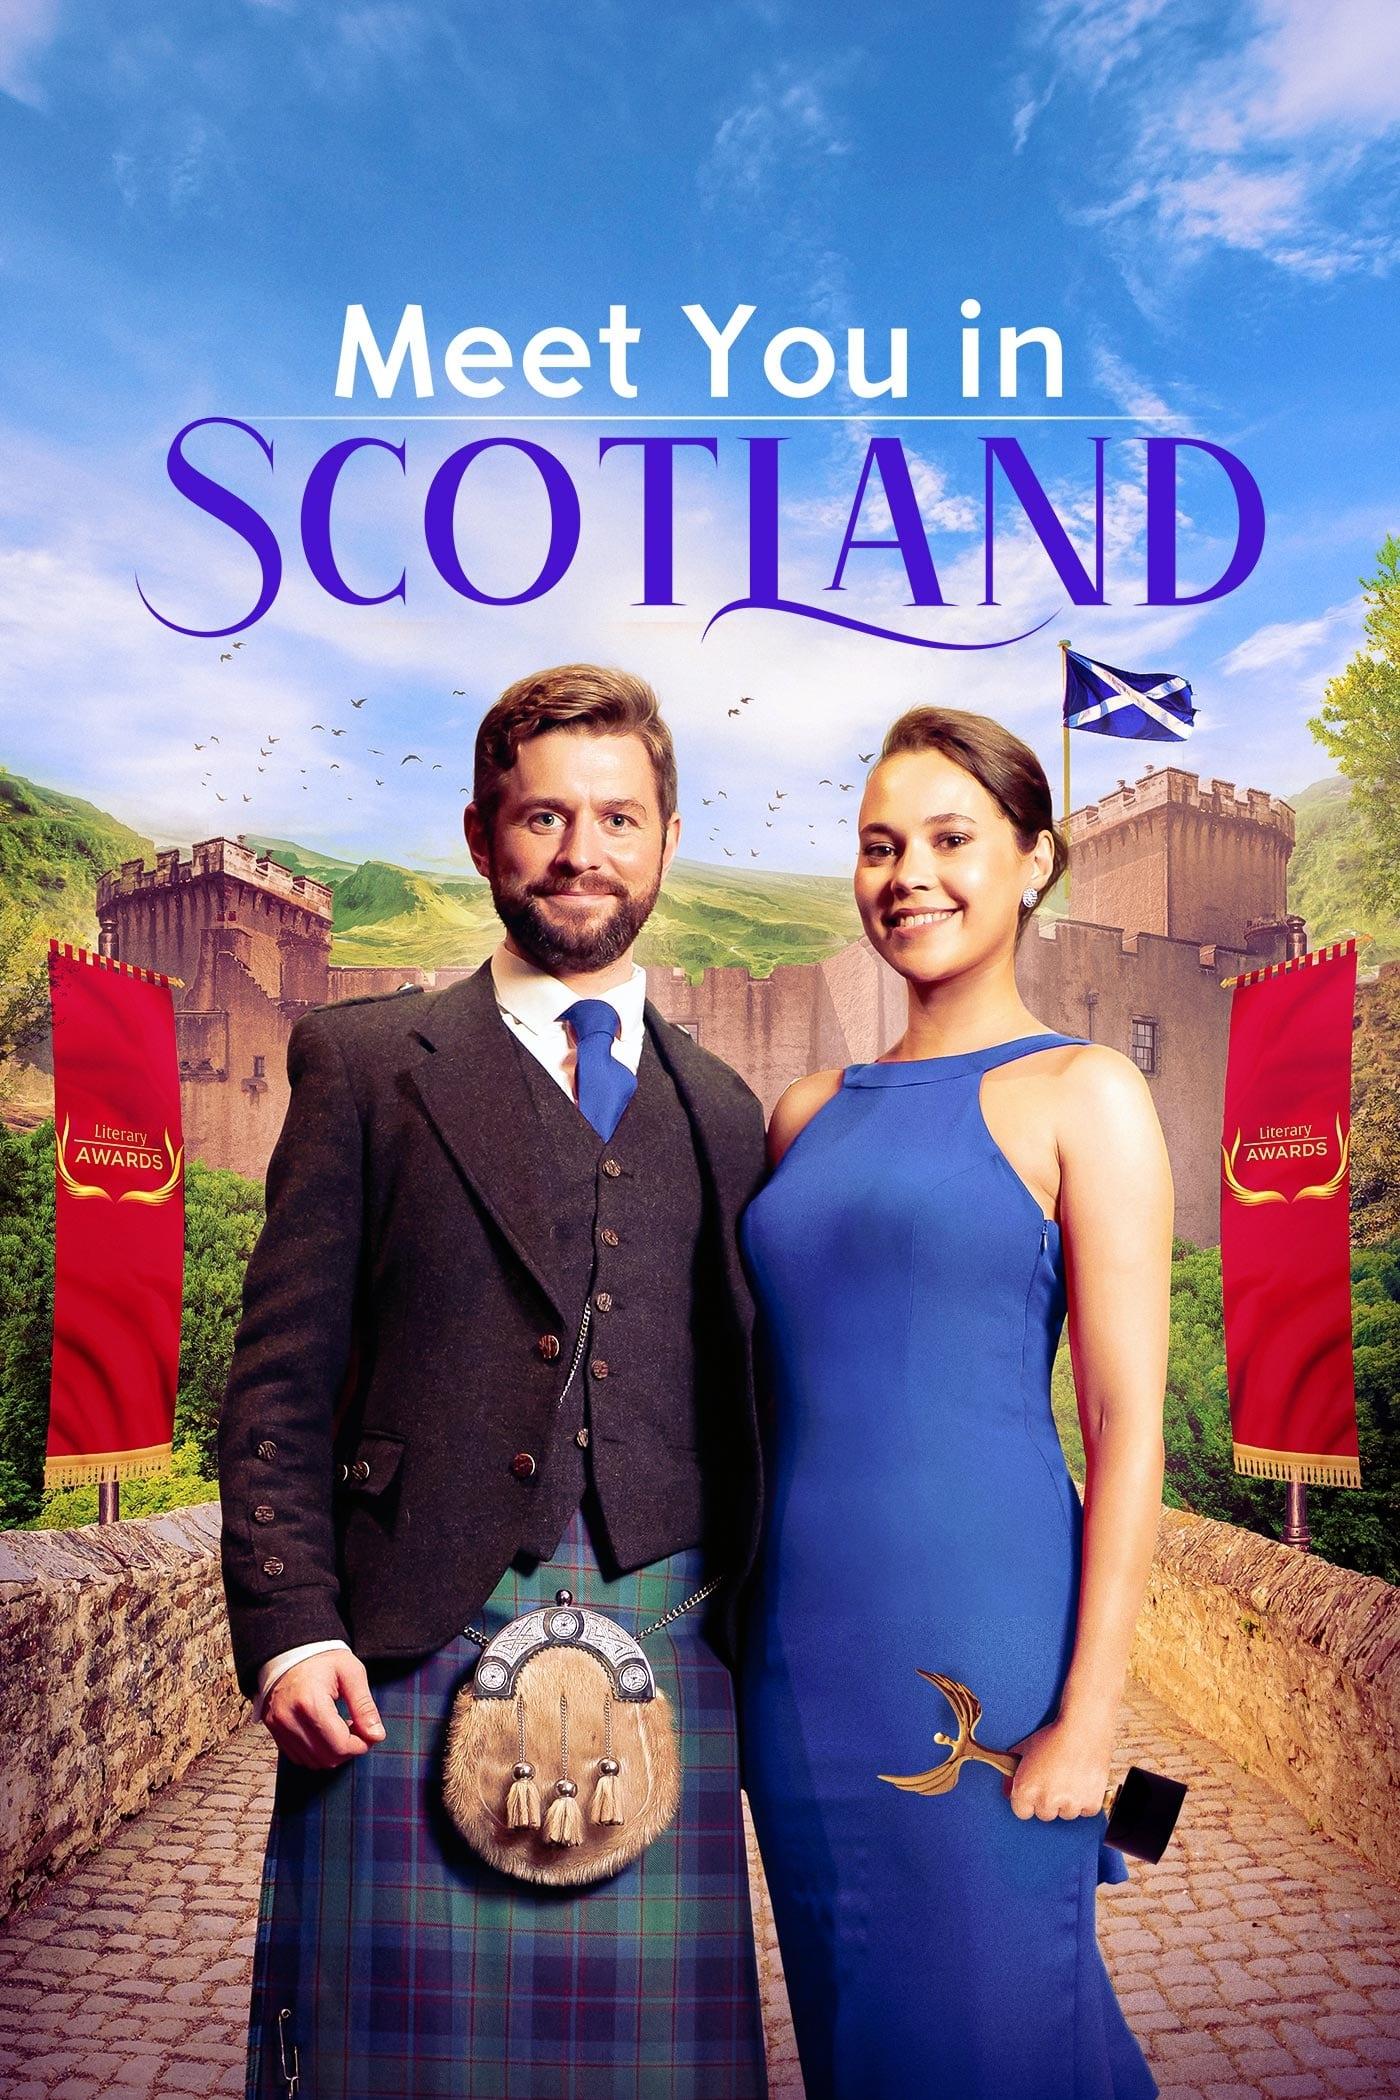 Meet You in Scotland poster